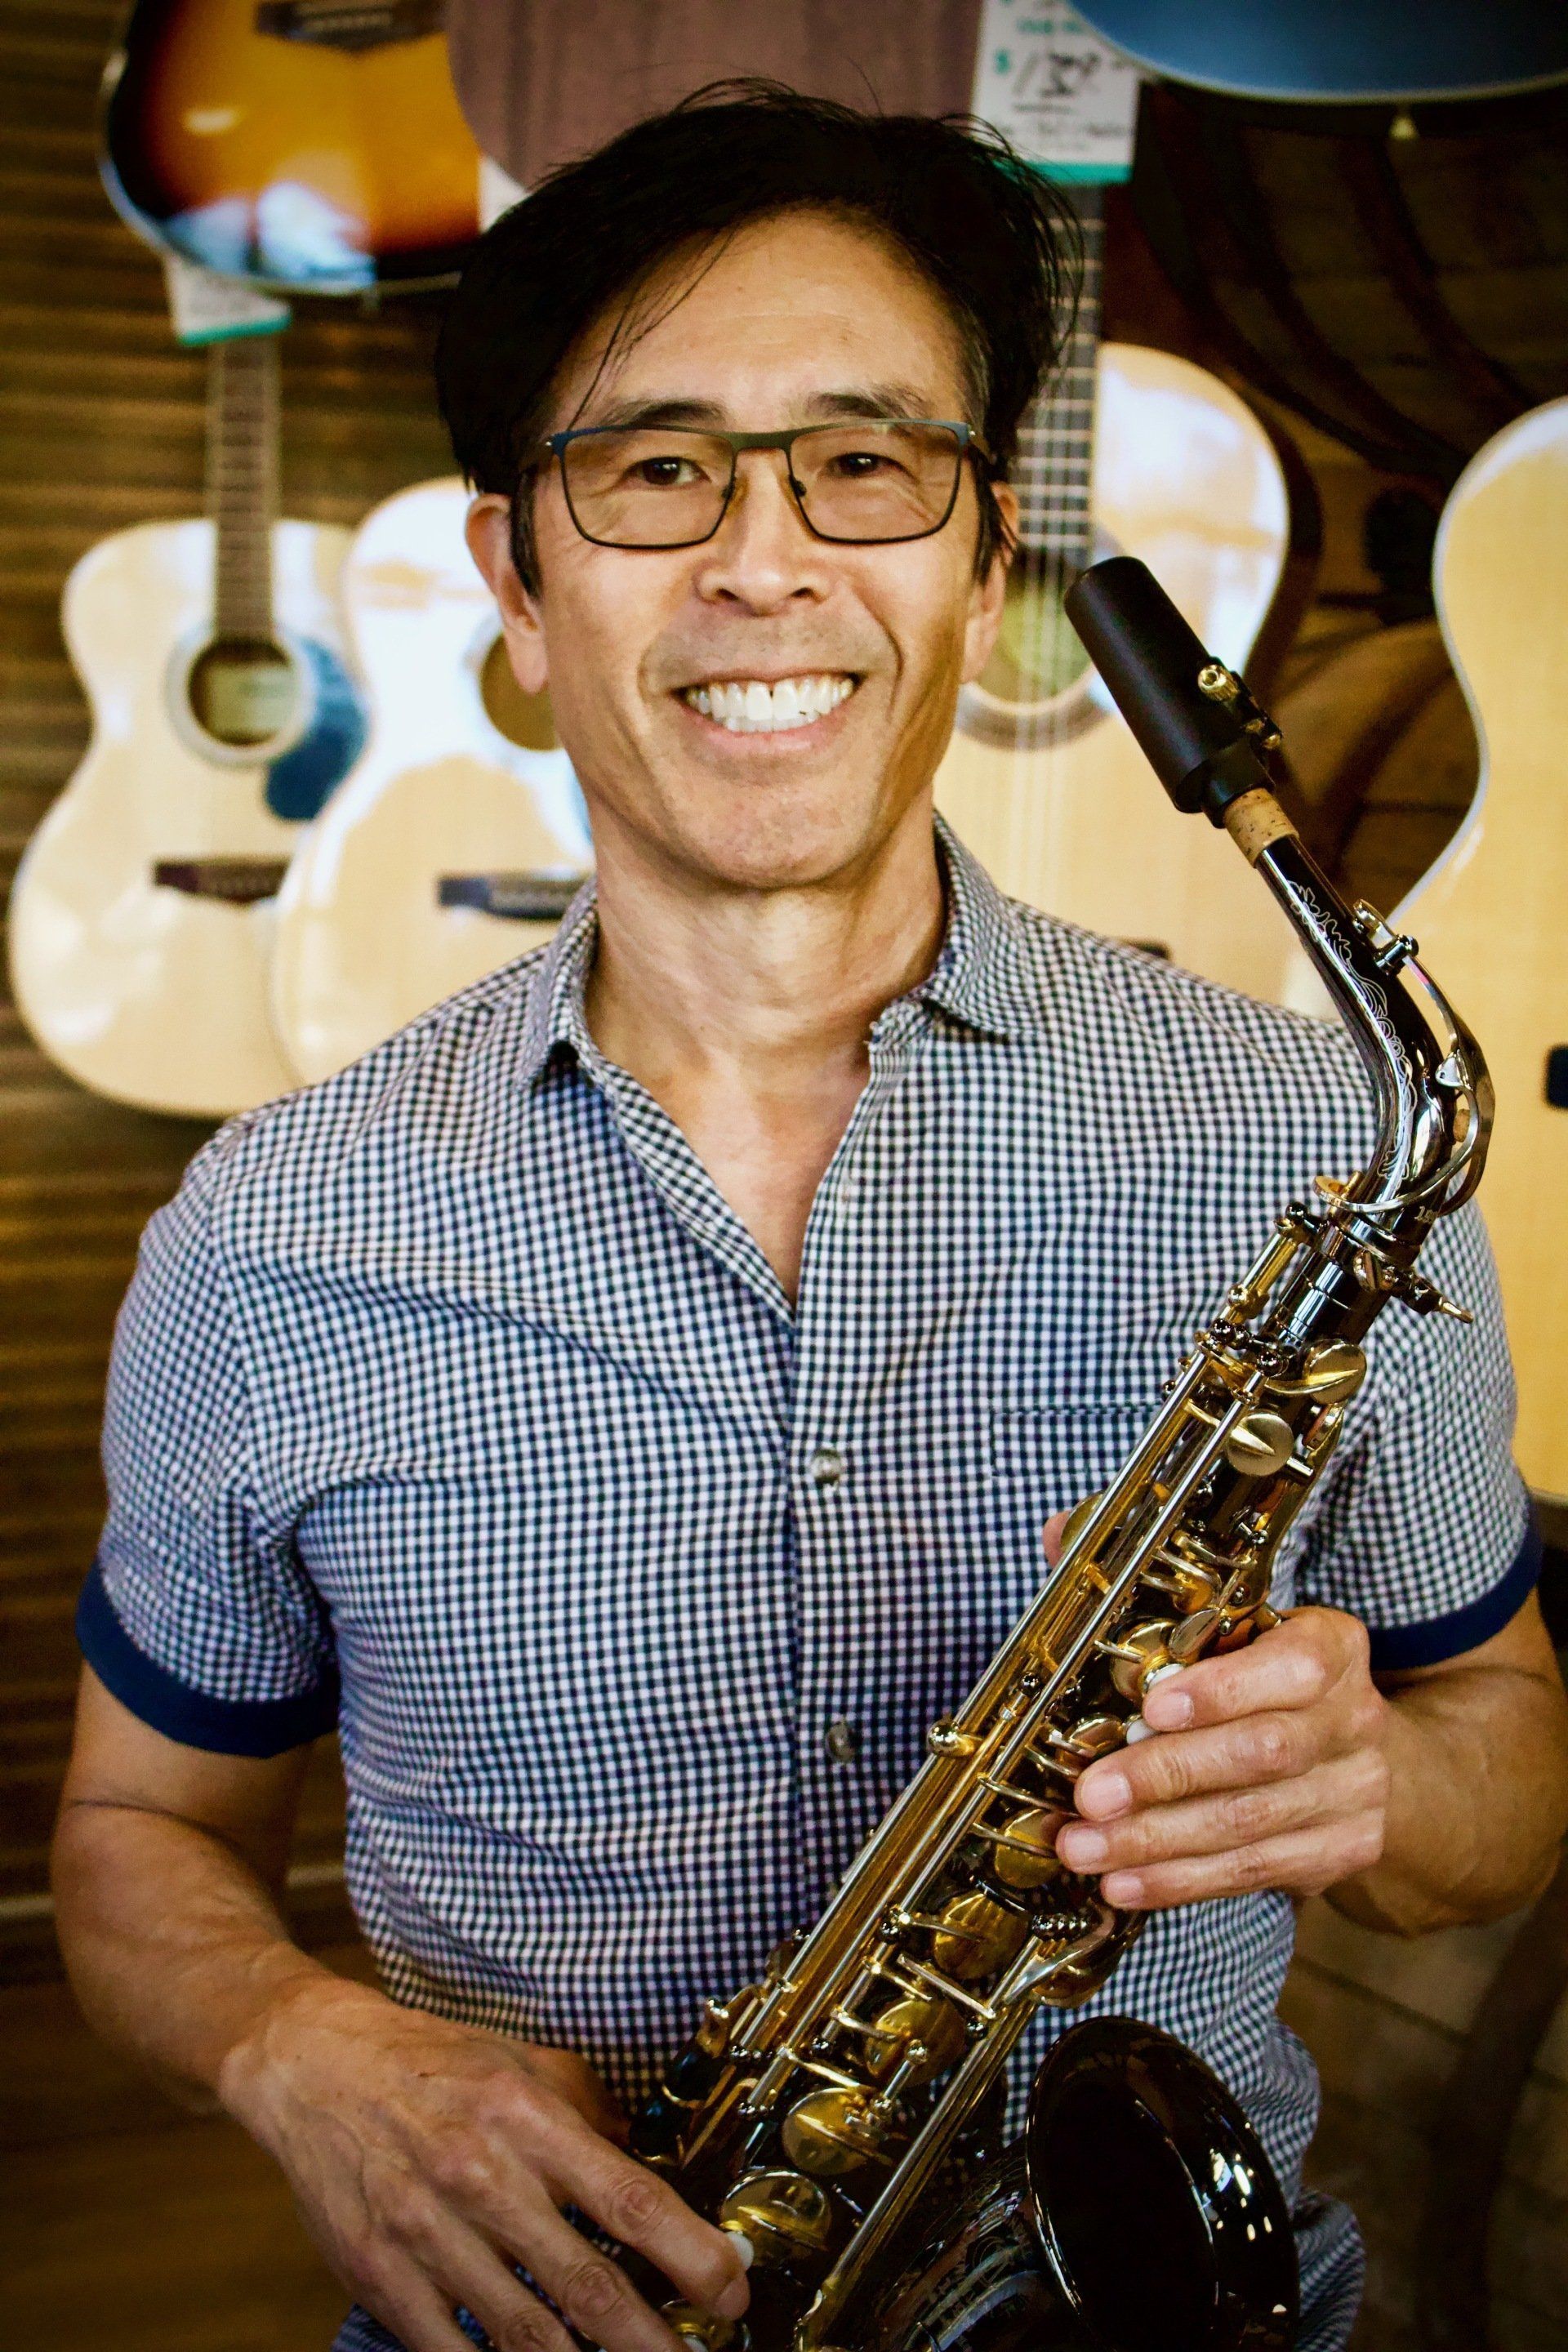 Mike Mekata  teaches alto sax and tenor saxophone lessons and clarinet classes at OC Music in RSM